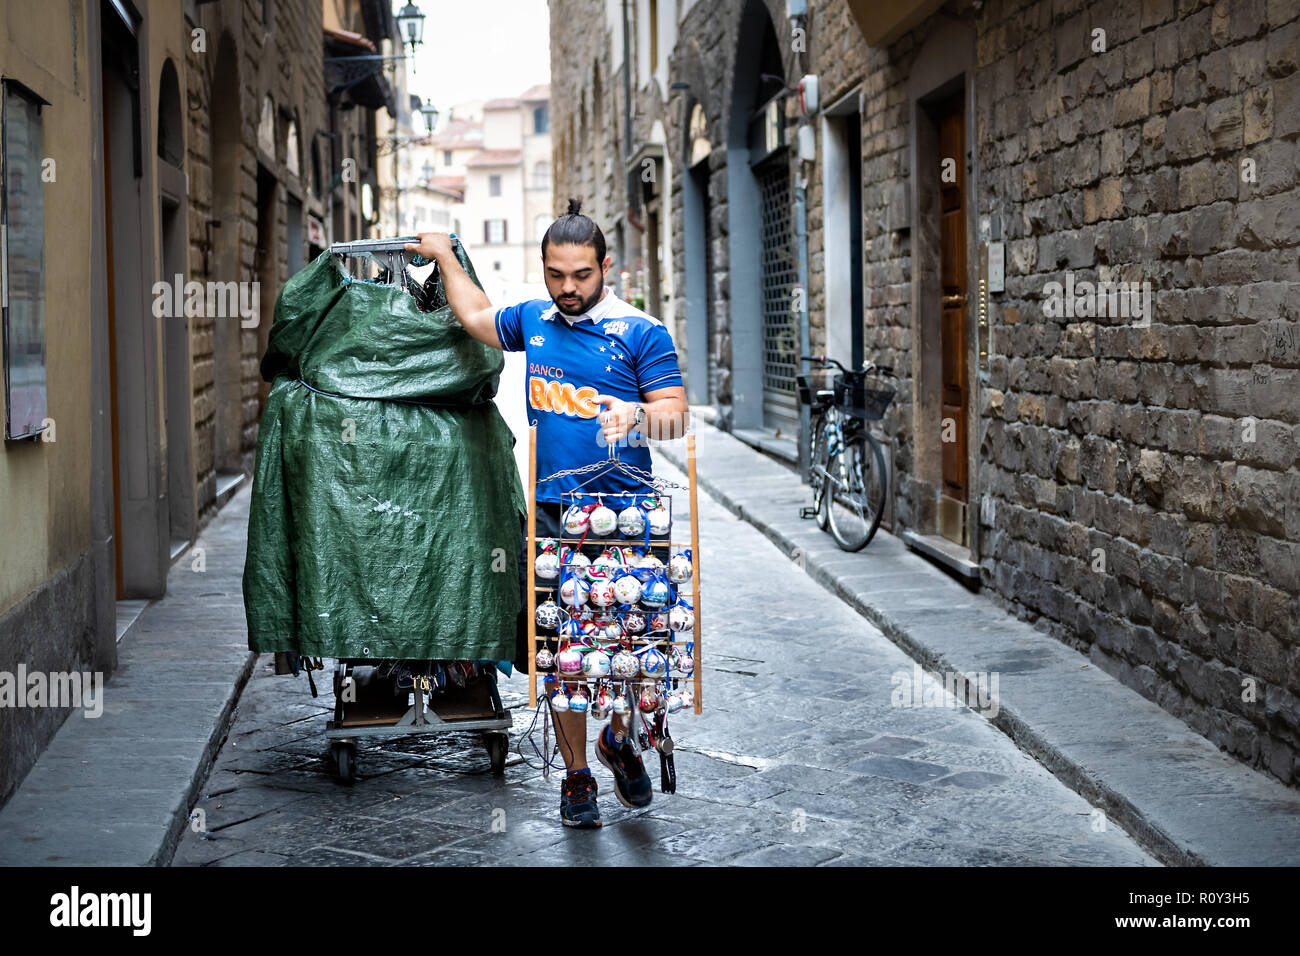 Florence, Italy - August 31, 2018: Young Italian man, street vendor, seller at Firenze Mercato di San Lorenzo, walking in narrow alley, holding souven Stock Photo